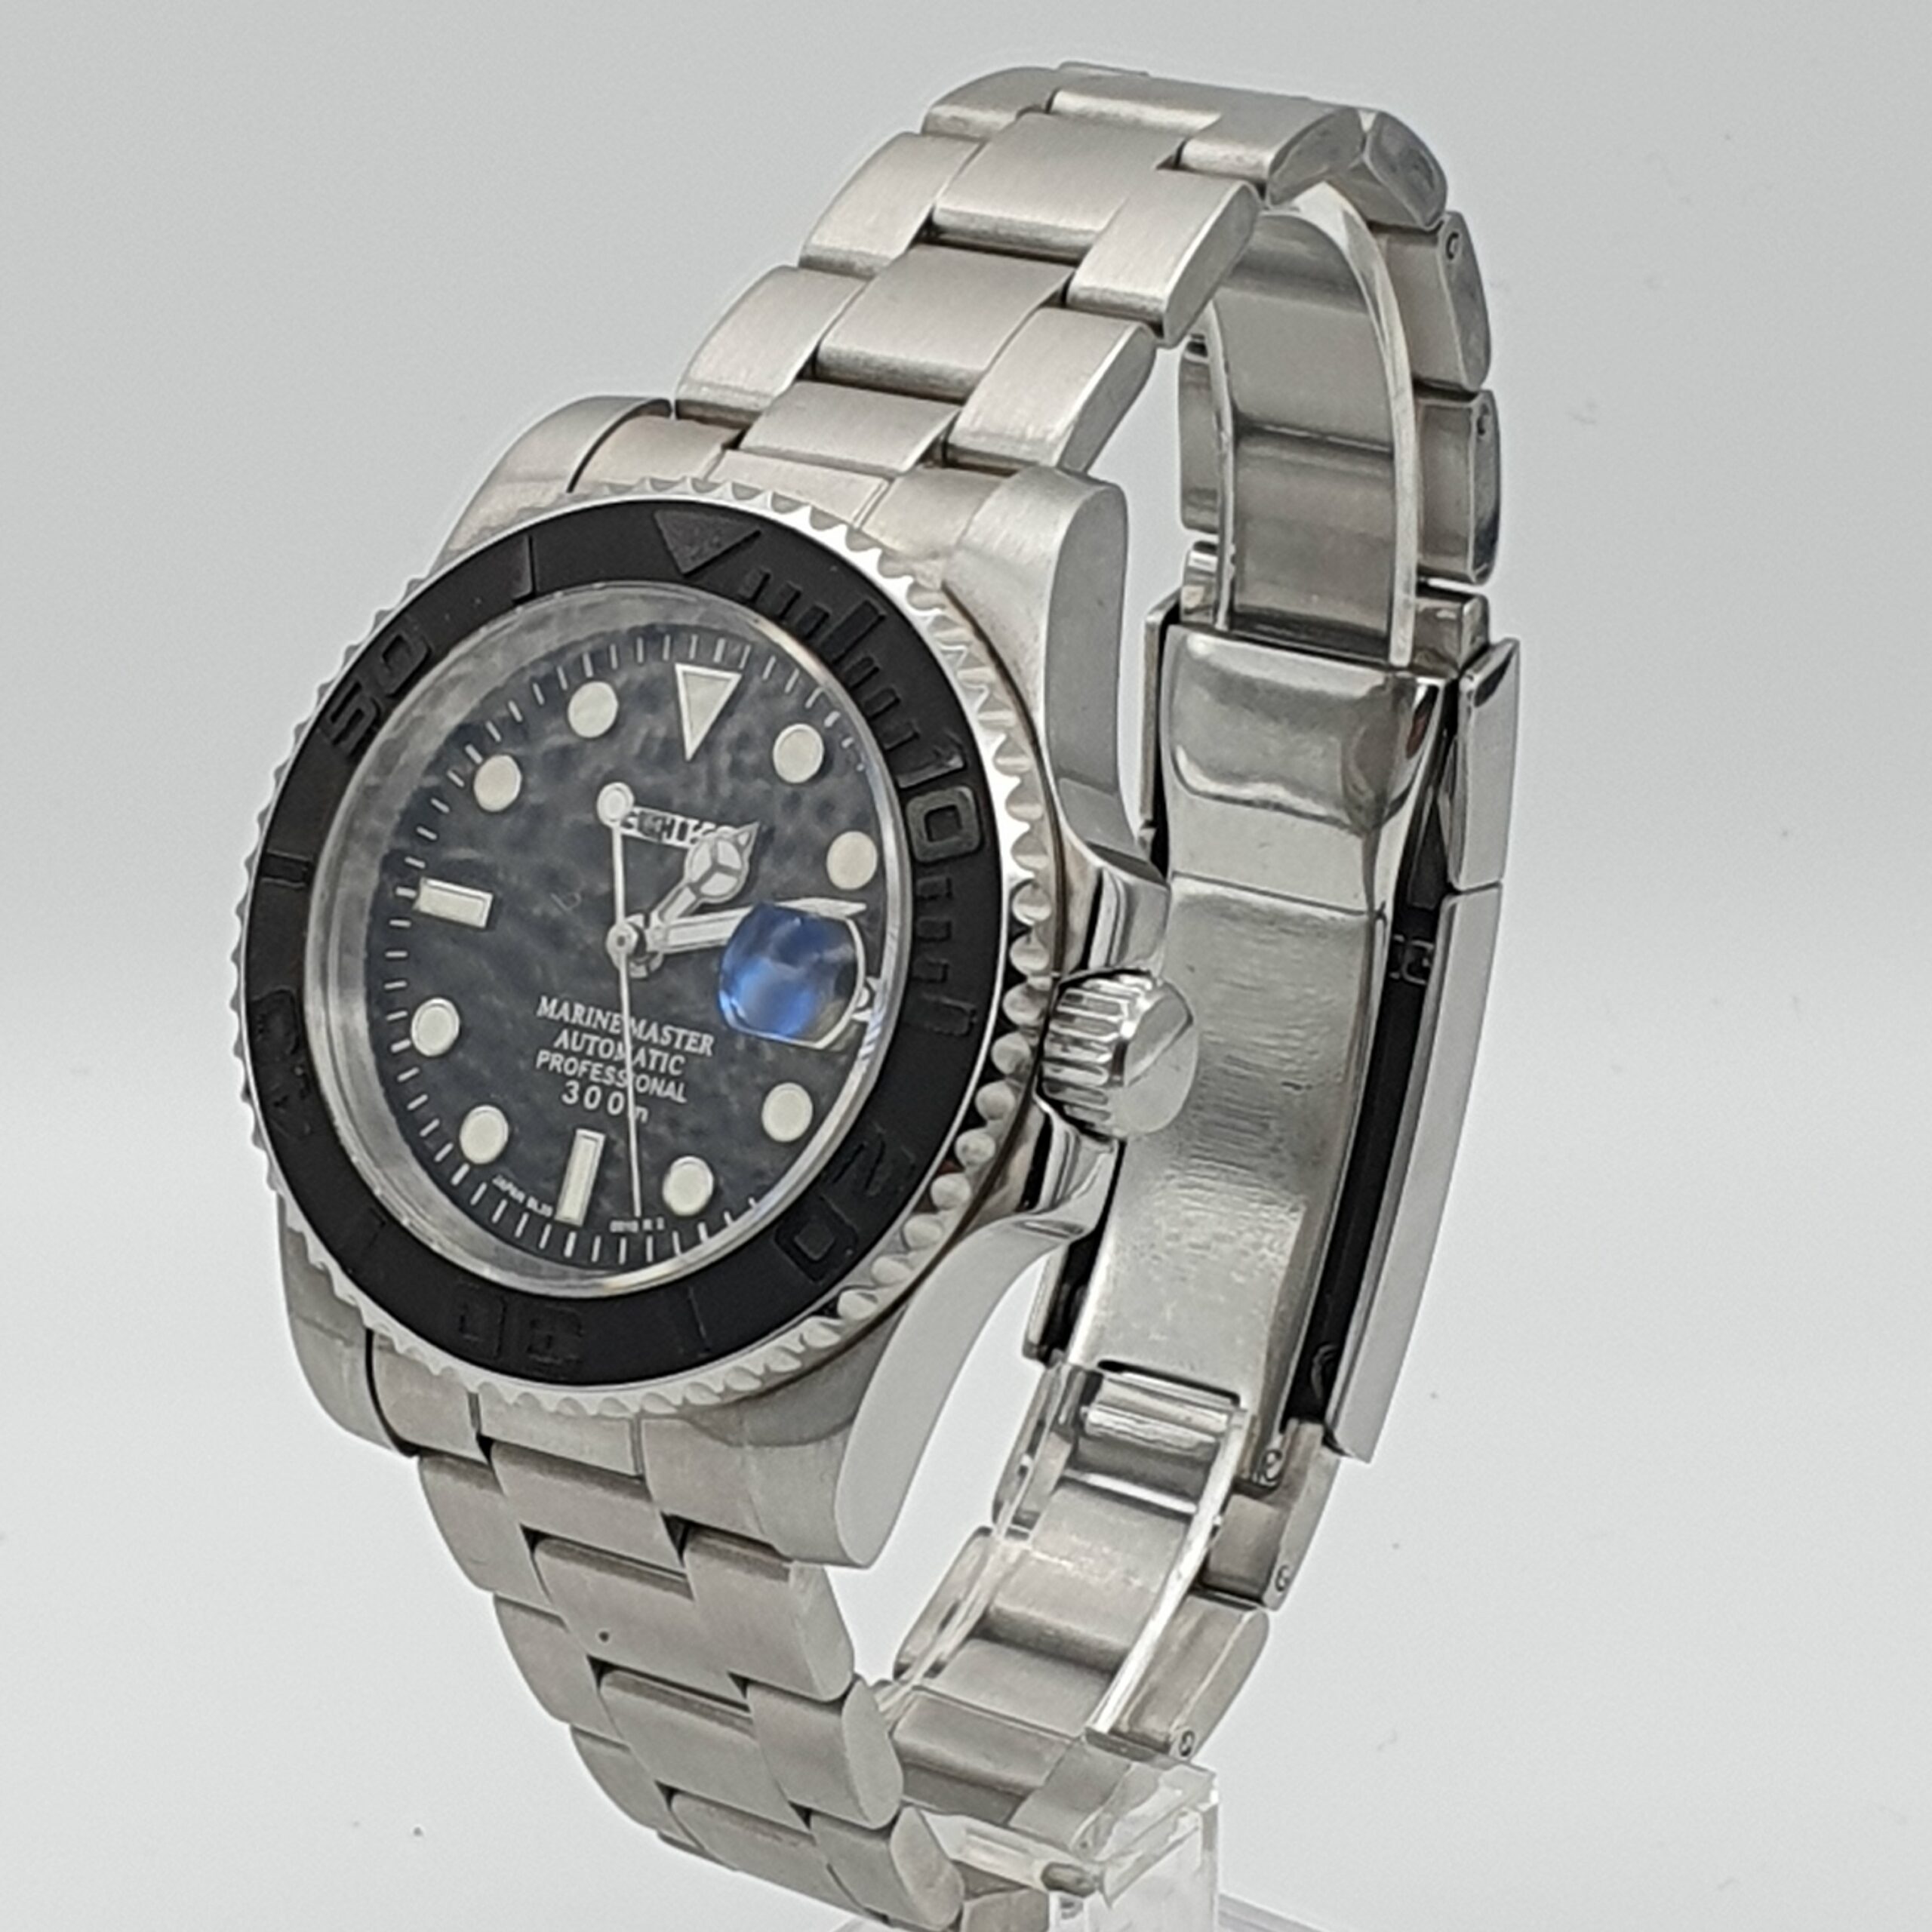 steeldive sd1953 stainless steel two-tone dial| Alibaba.com